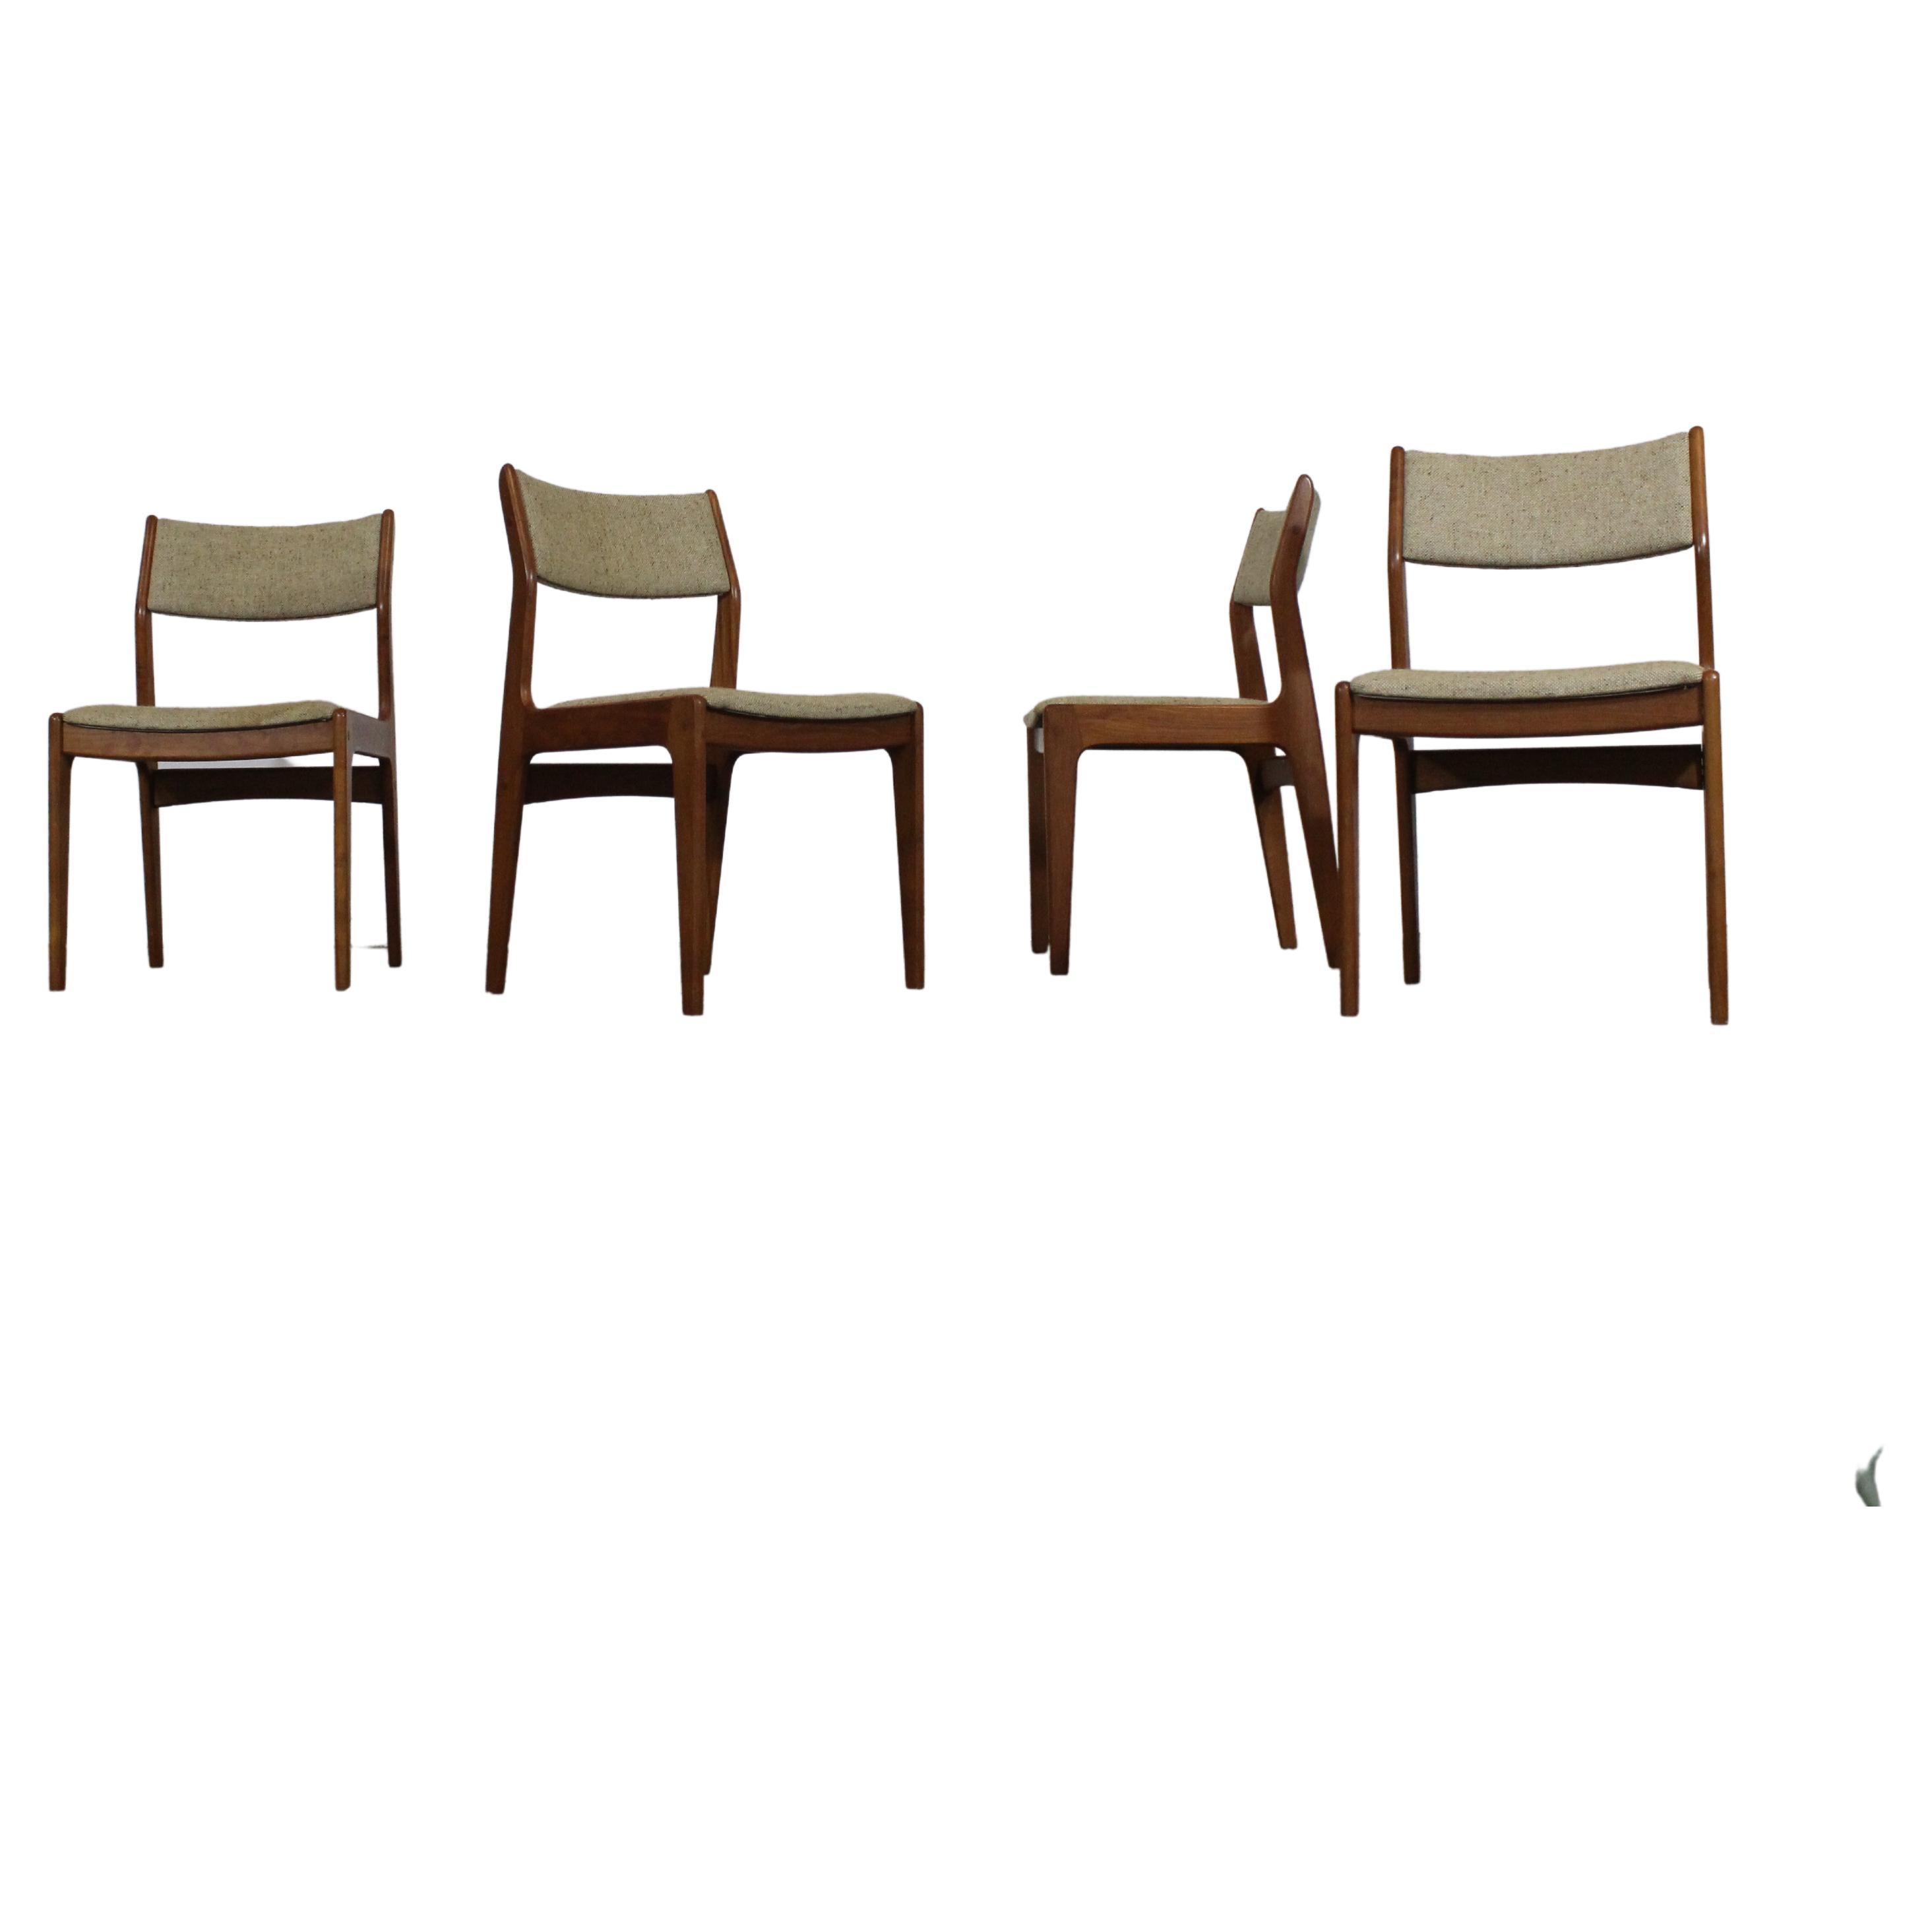 Set of 4 Danish Modern Teak Side Dining Chairs by D-Scan